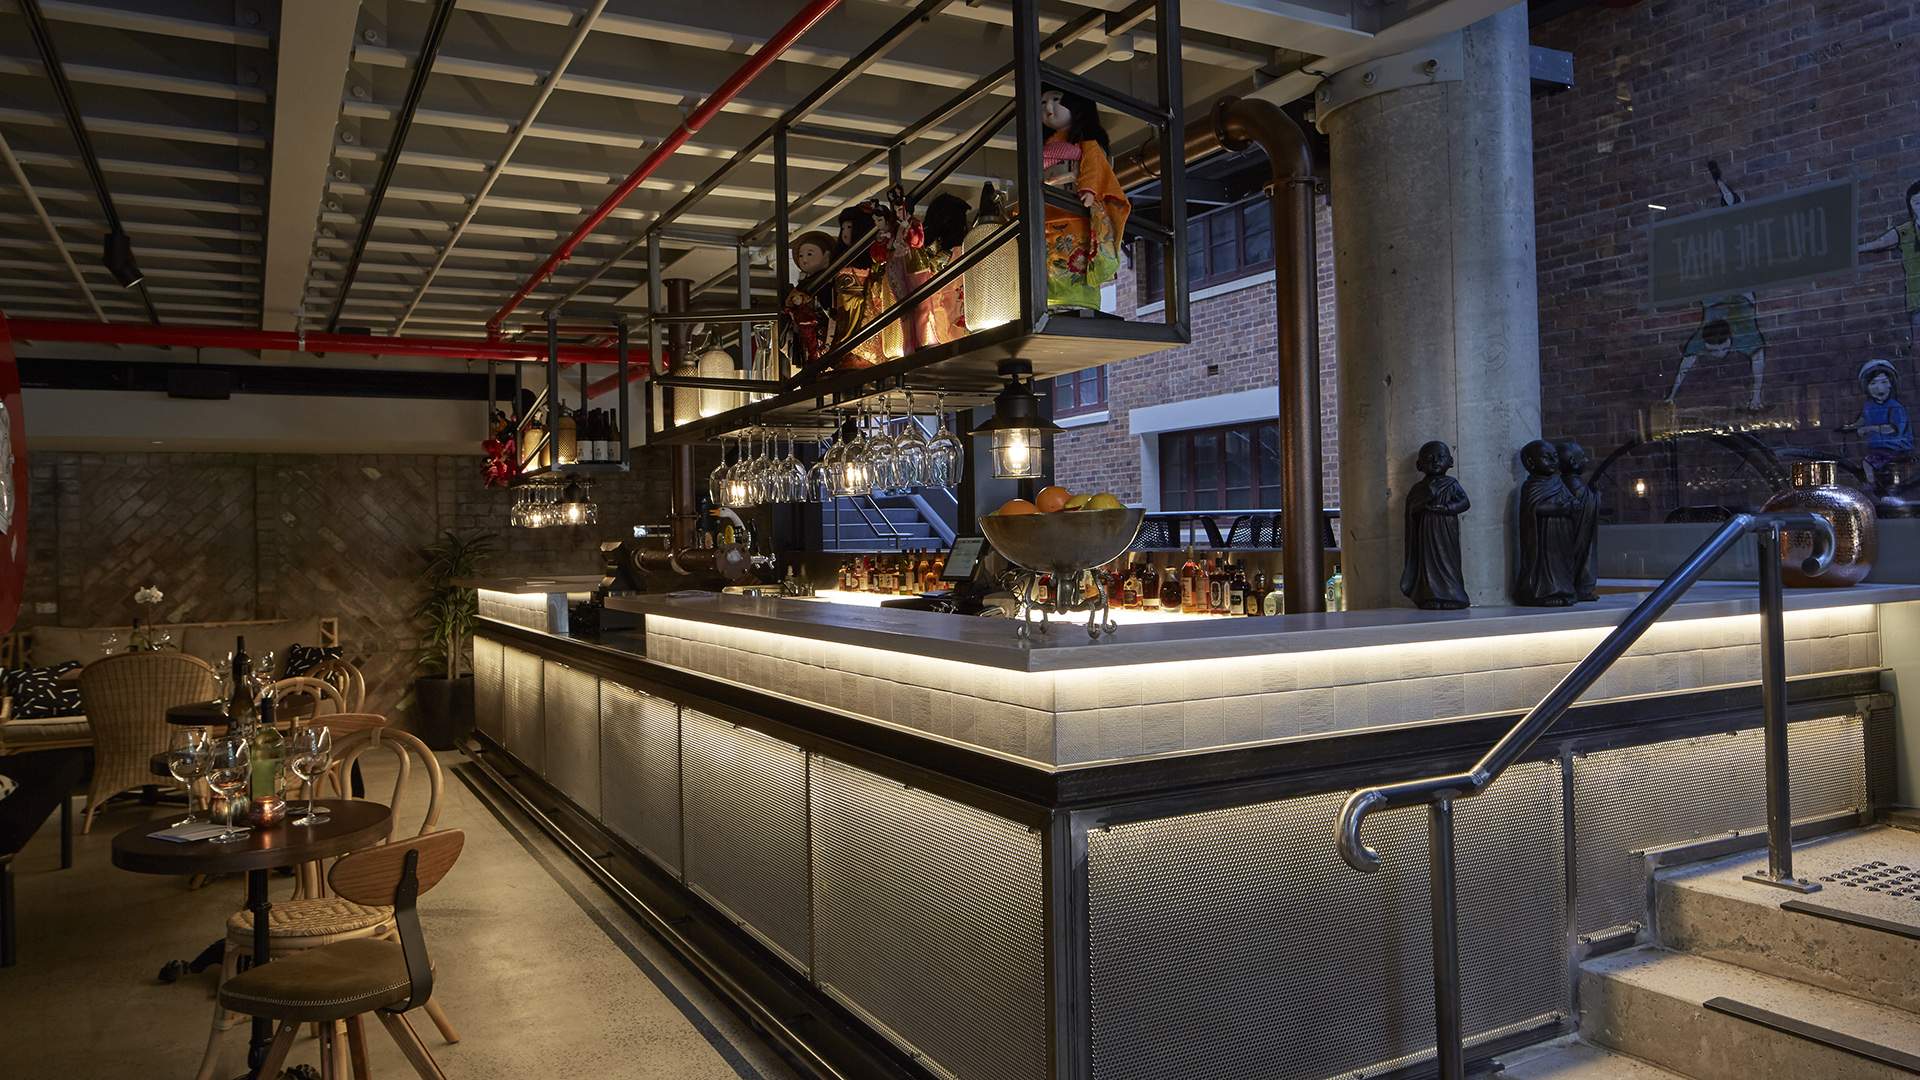 Chu the Phat Is Fish Lane's New Asian Hawker-Inspired Eatery